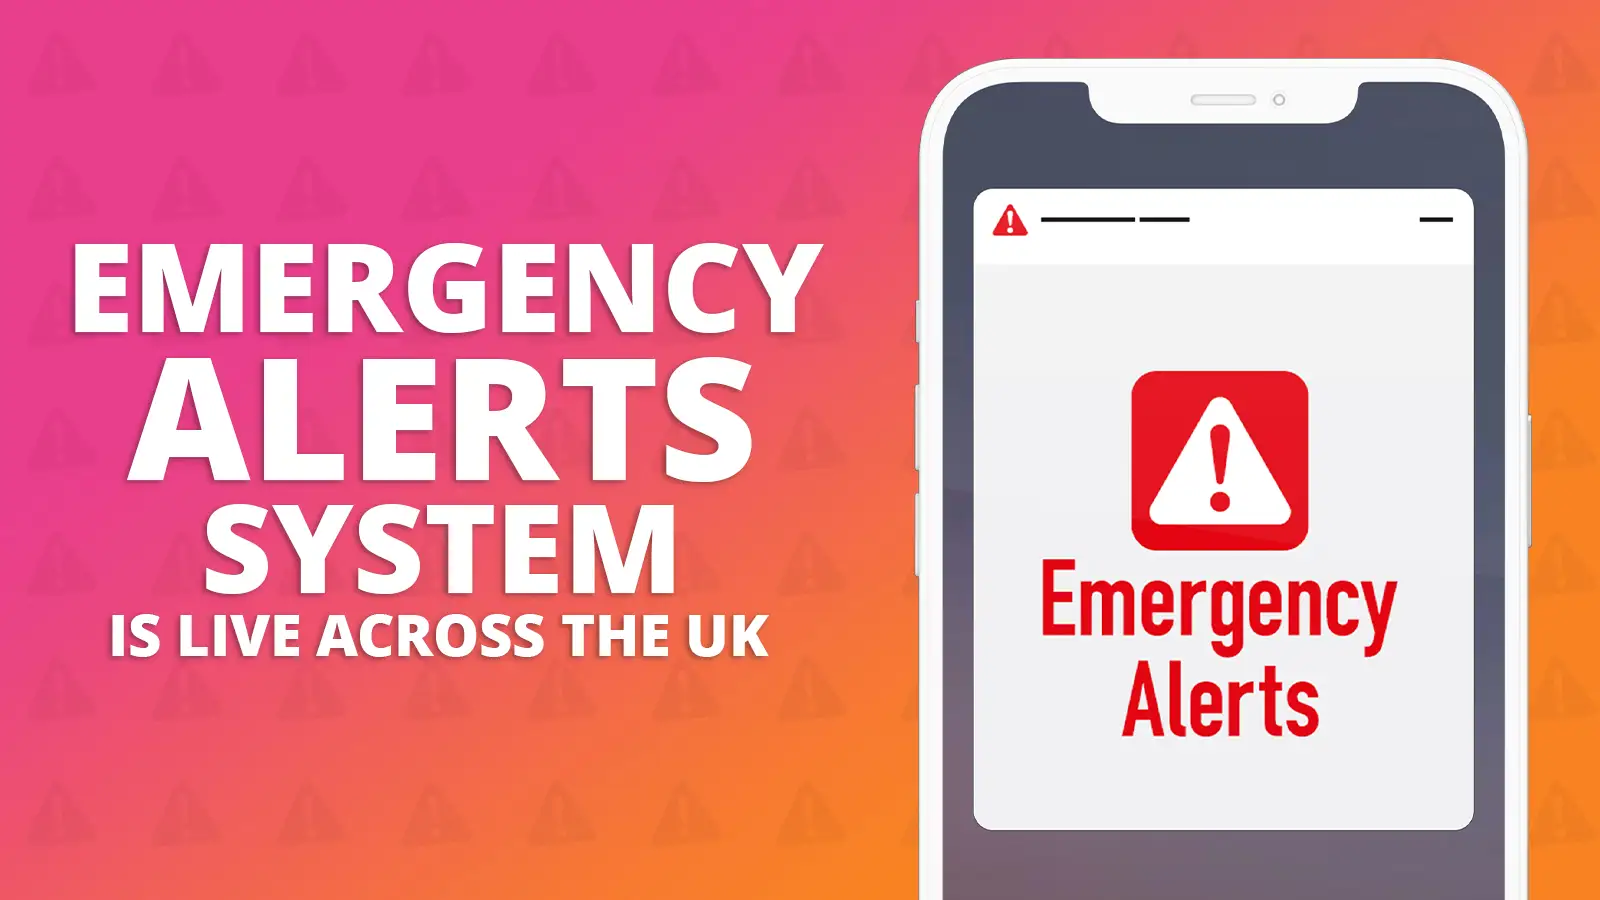 Email Library: Emergency Alerts